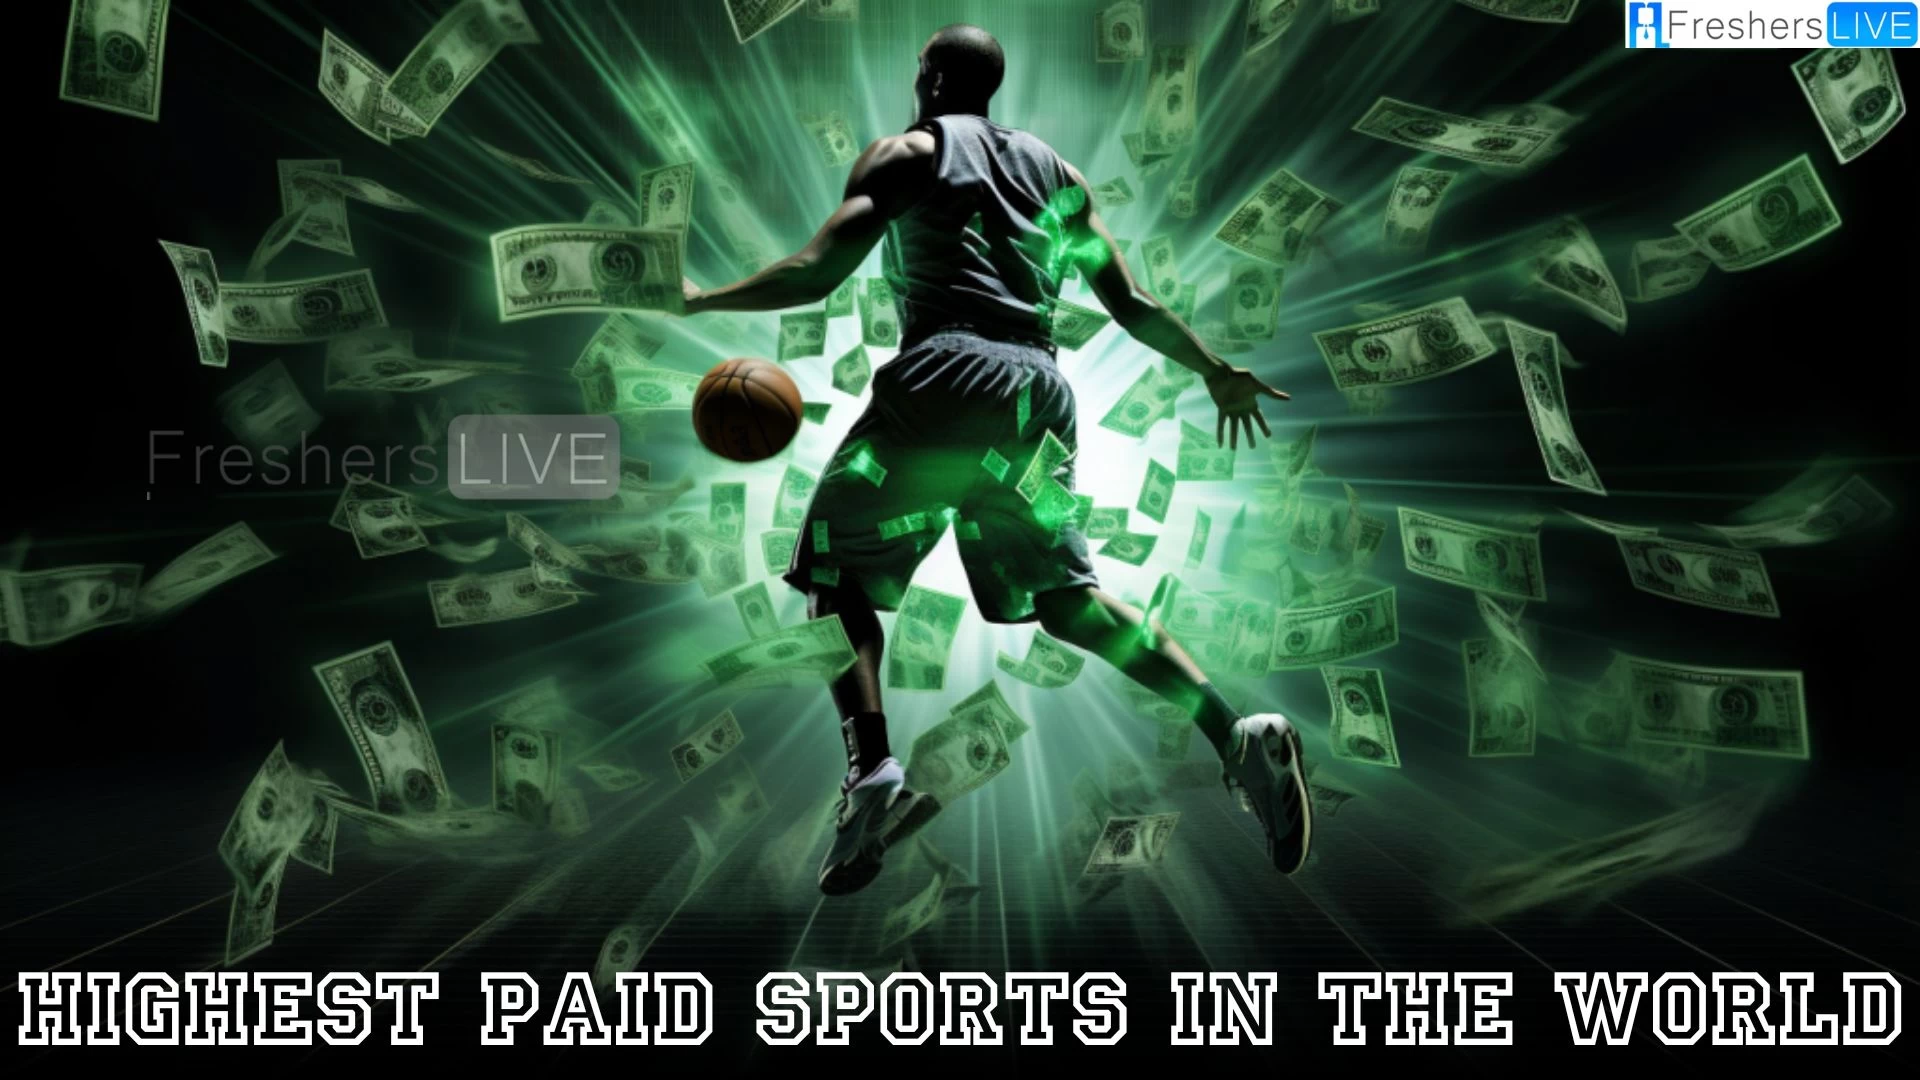 Top 10 Highest Paid Sports in the World - Global Pursuit of Glory